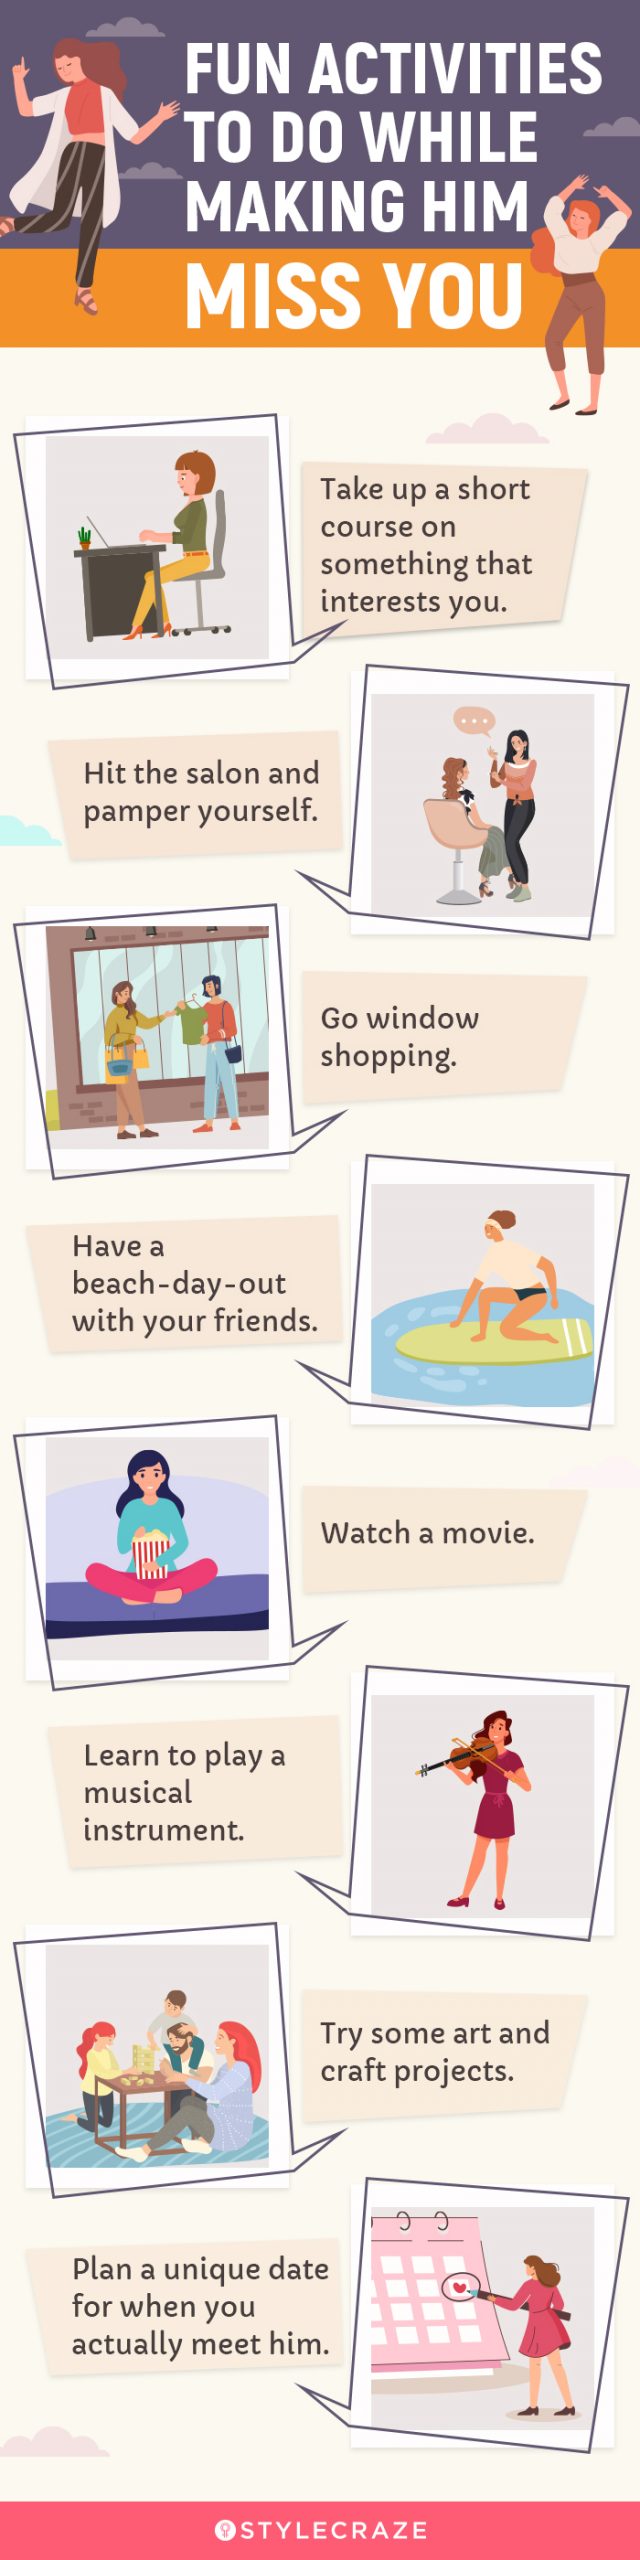 fun activities to do while making him miss you [infographic]